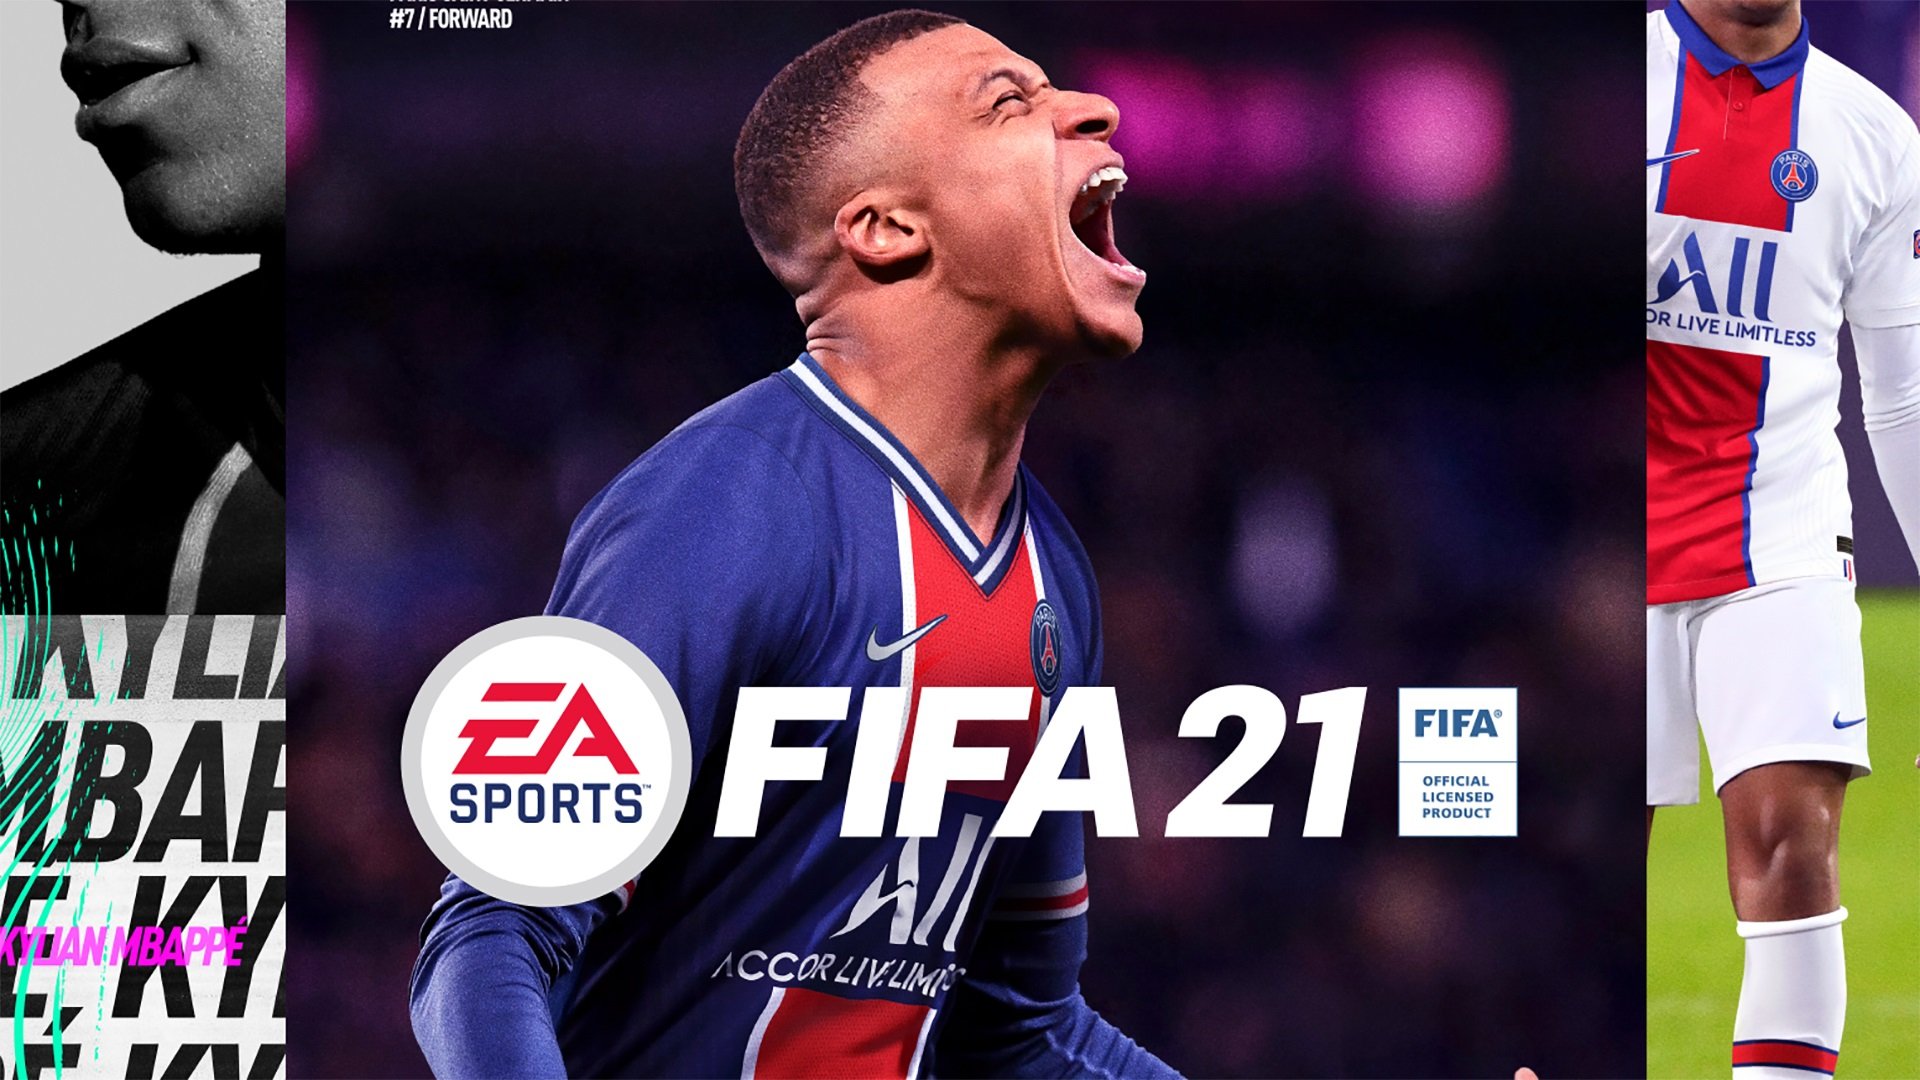 FIFA 21 Currently selling with 30% off the original price and available for Steam, Origin and all consoles, including Nintendo Switch with the FIFA 21: Legacy Edition